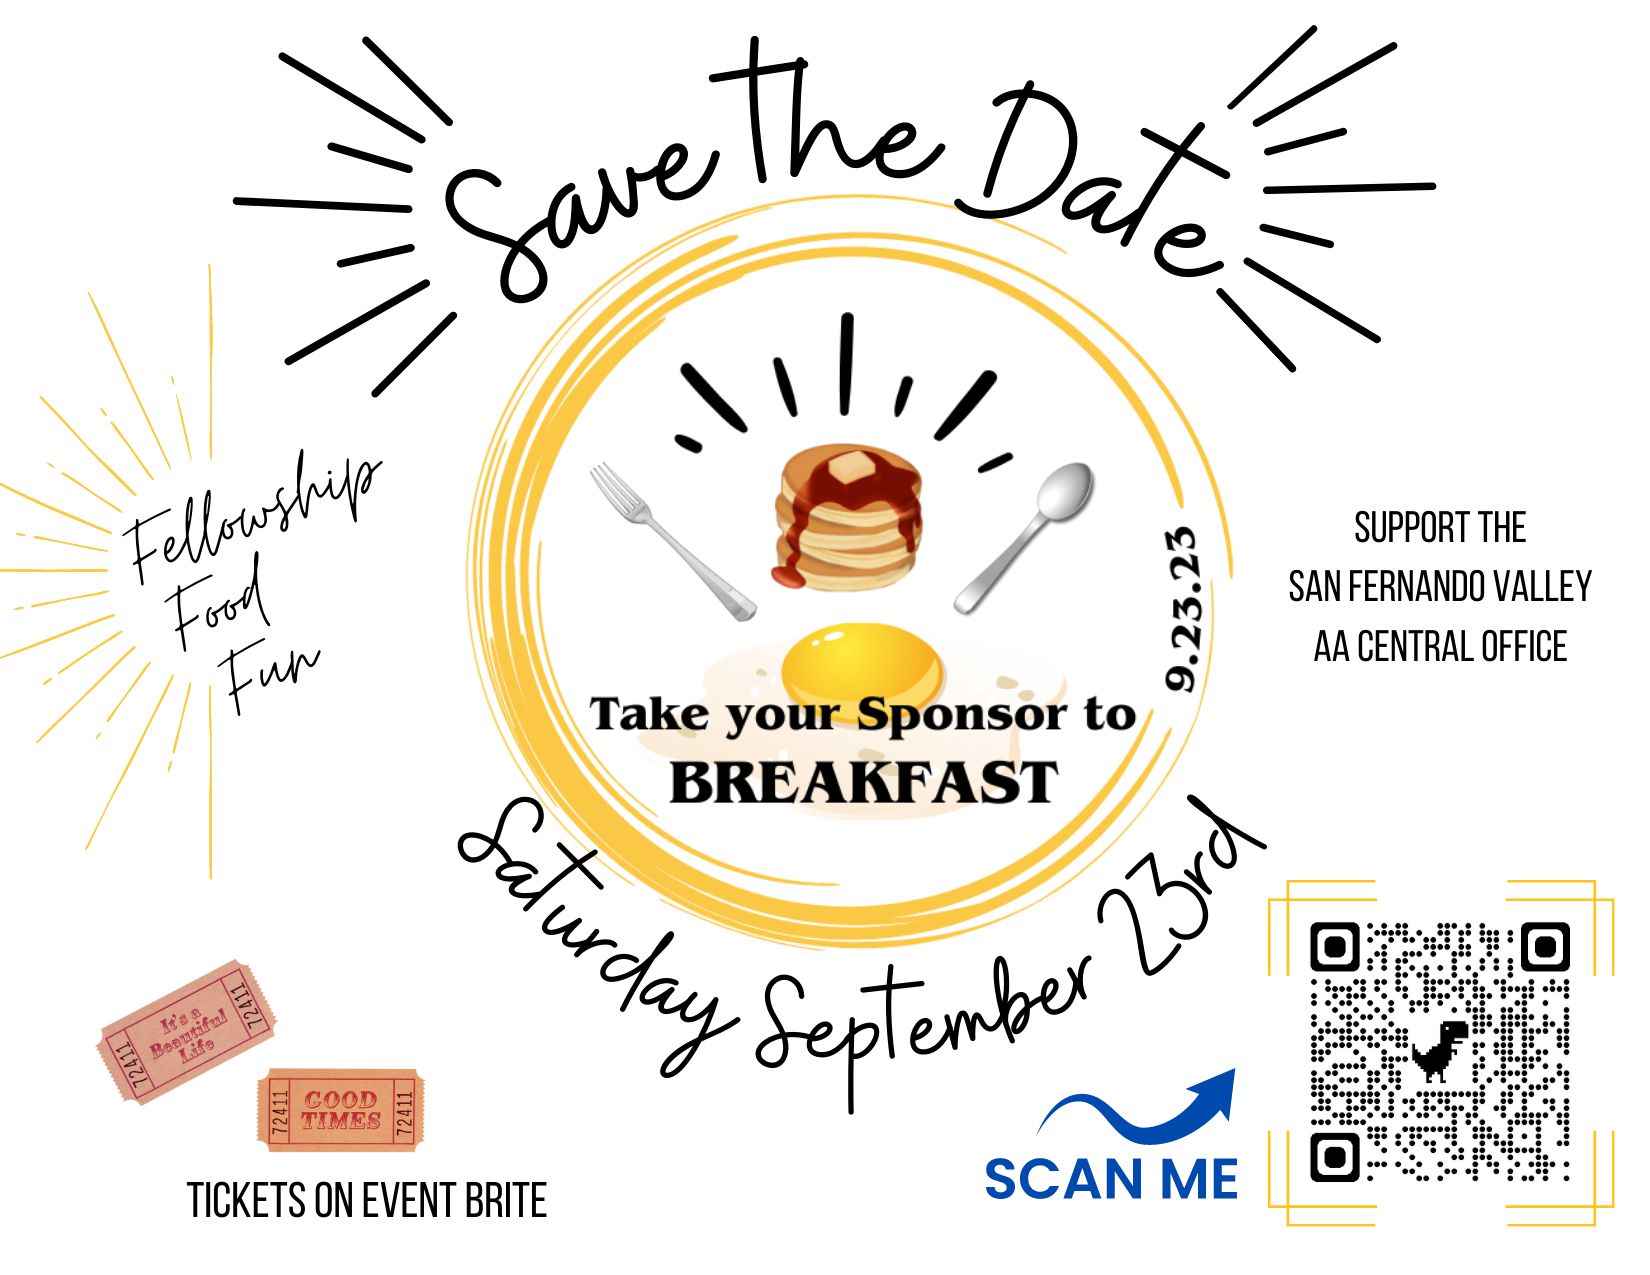 Save The Date! Take Your Sponsor to Breakfast – Sept 23rd